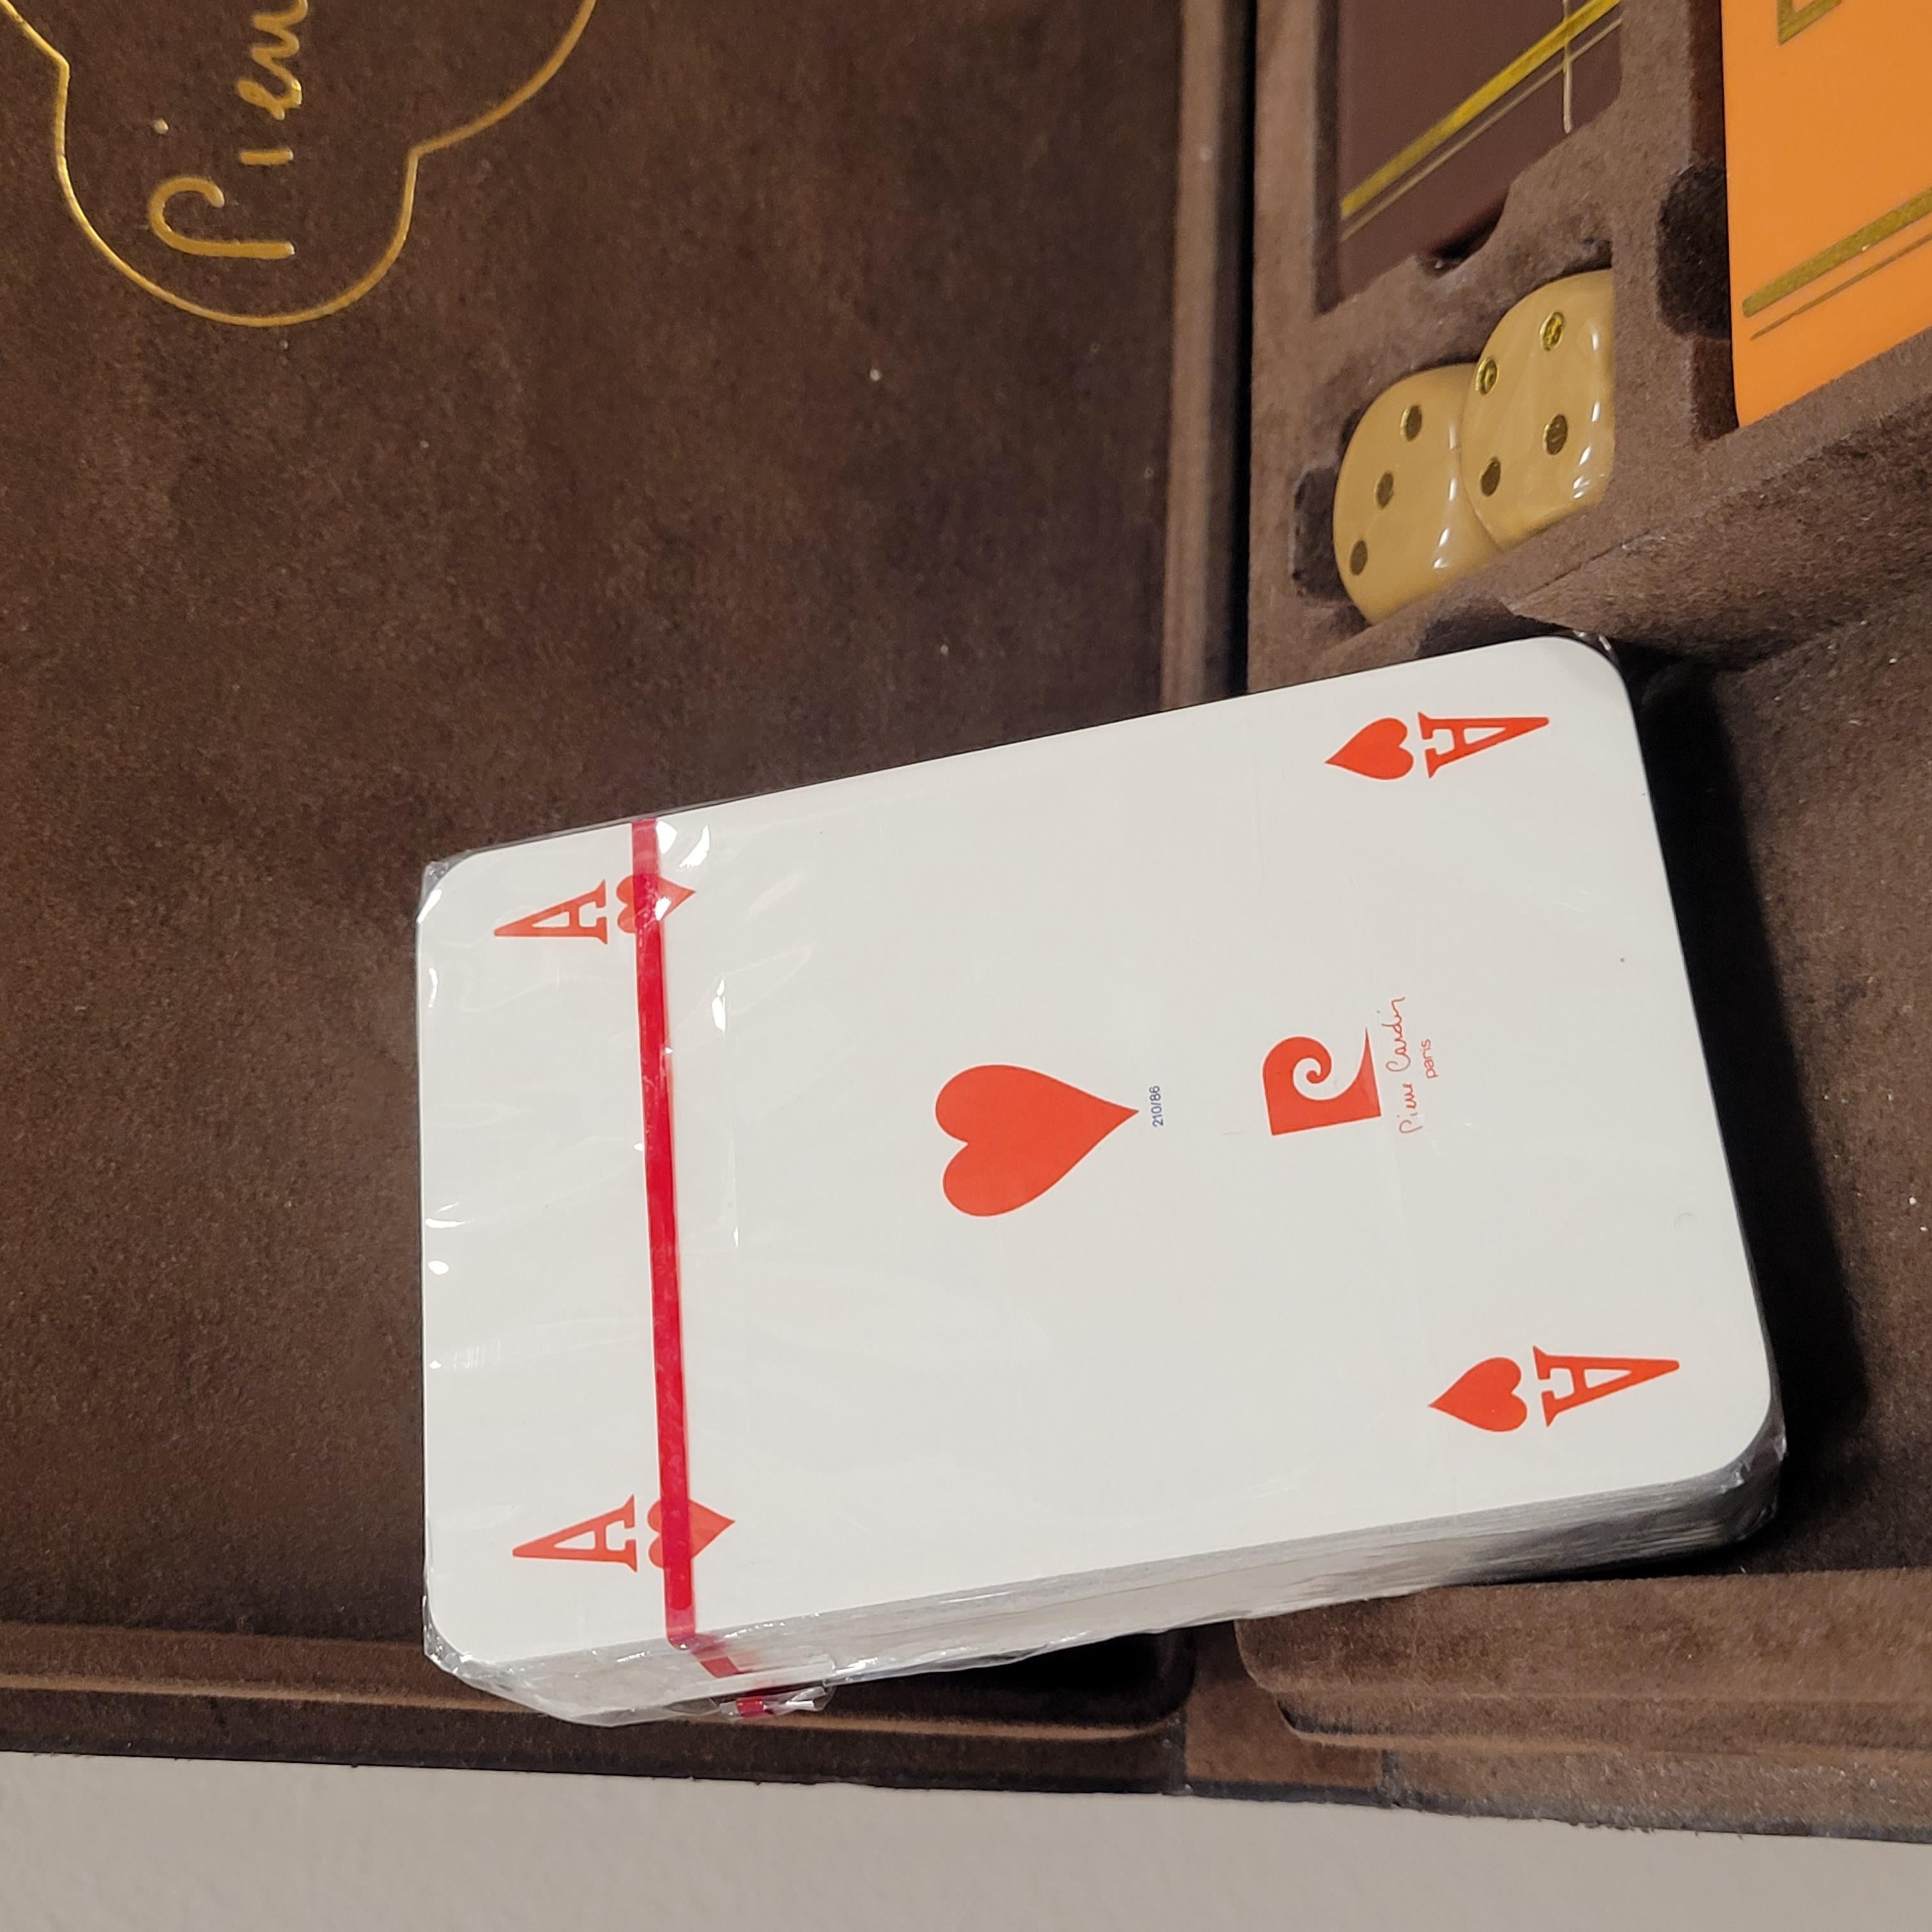 Poker game or set, signed by Pierre Cardin, 60's - 70's, France 2